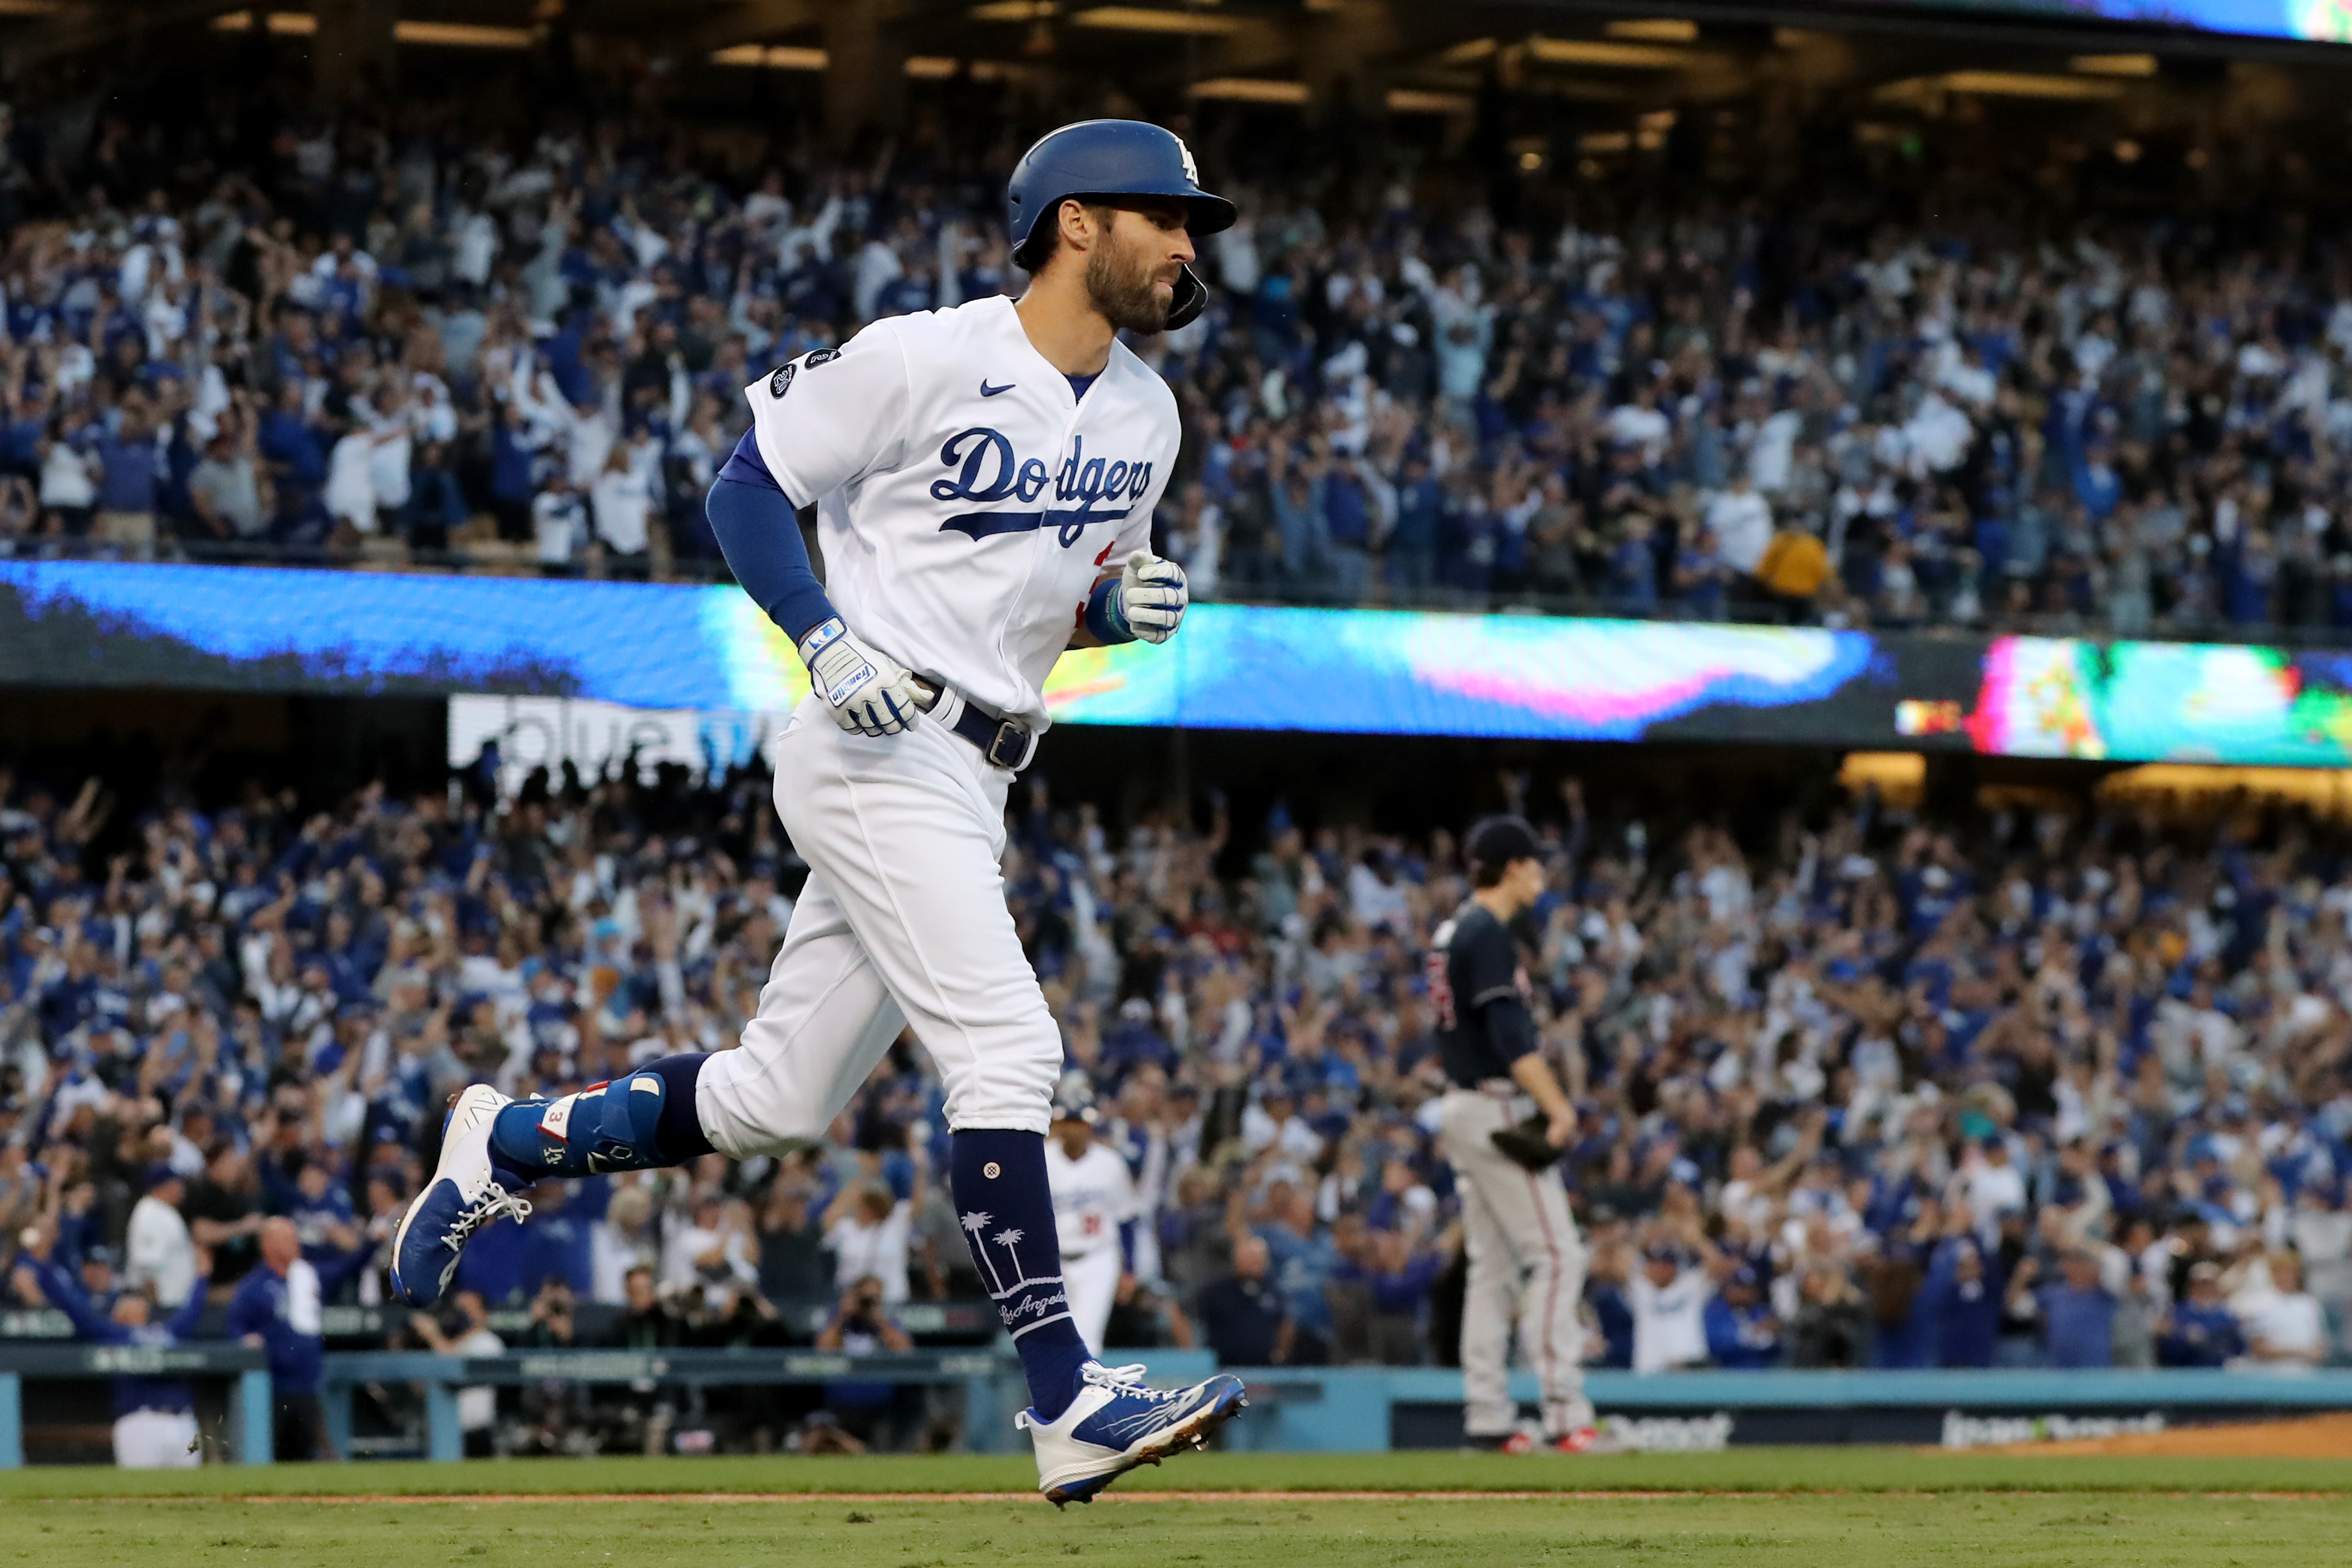 NLCS Game 3 at a glance: Dodgers 6, Braves 5